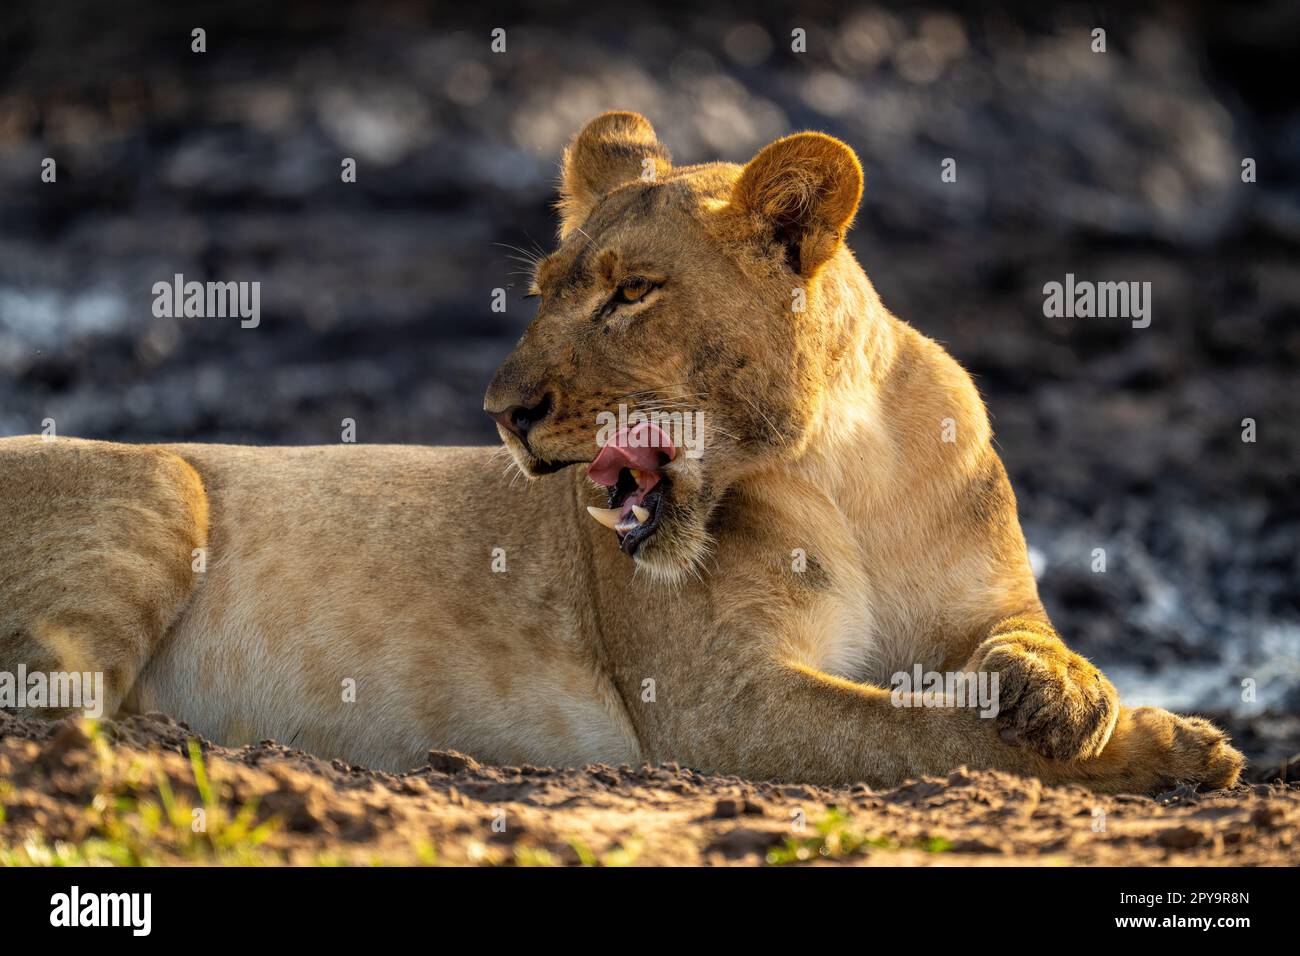 Close-up of young lion lying licking lips Stock Photo